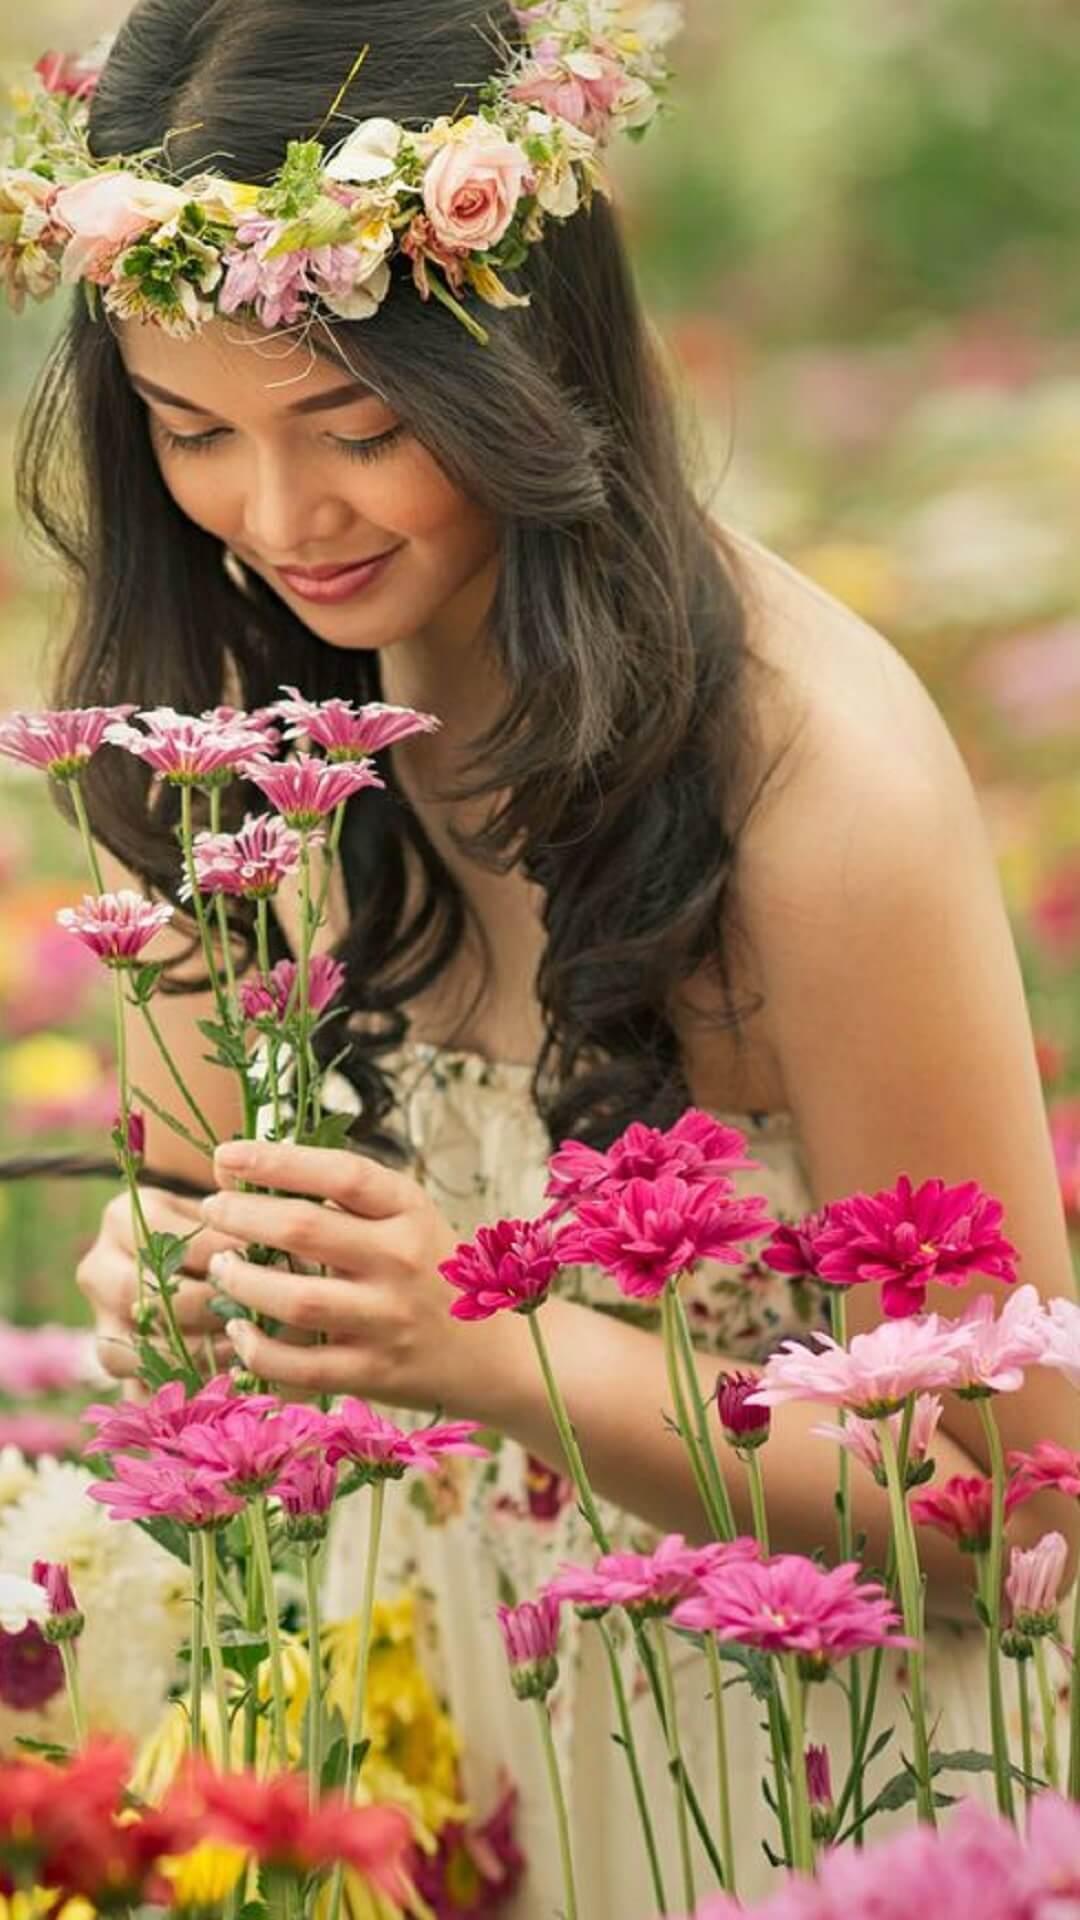 Women and flowers Wallpaper for Android